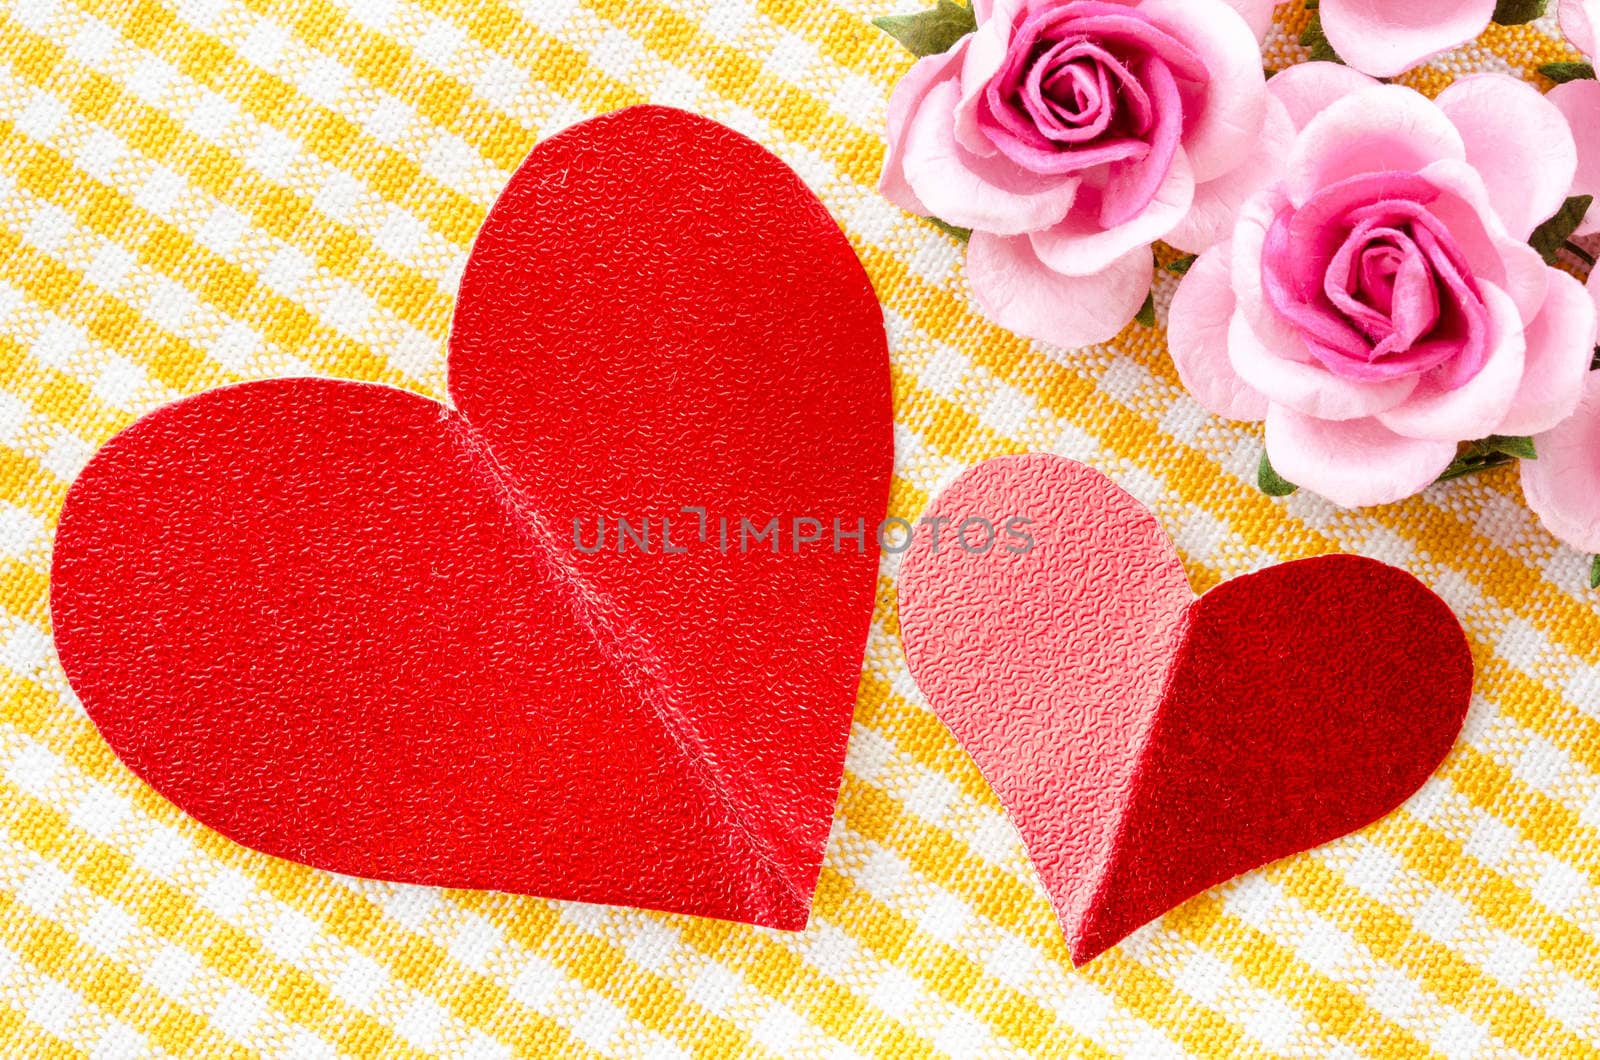 Red heart tag paper and pink rose flower. by Gamjai